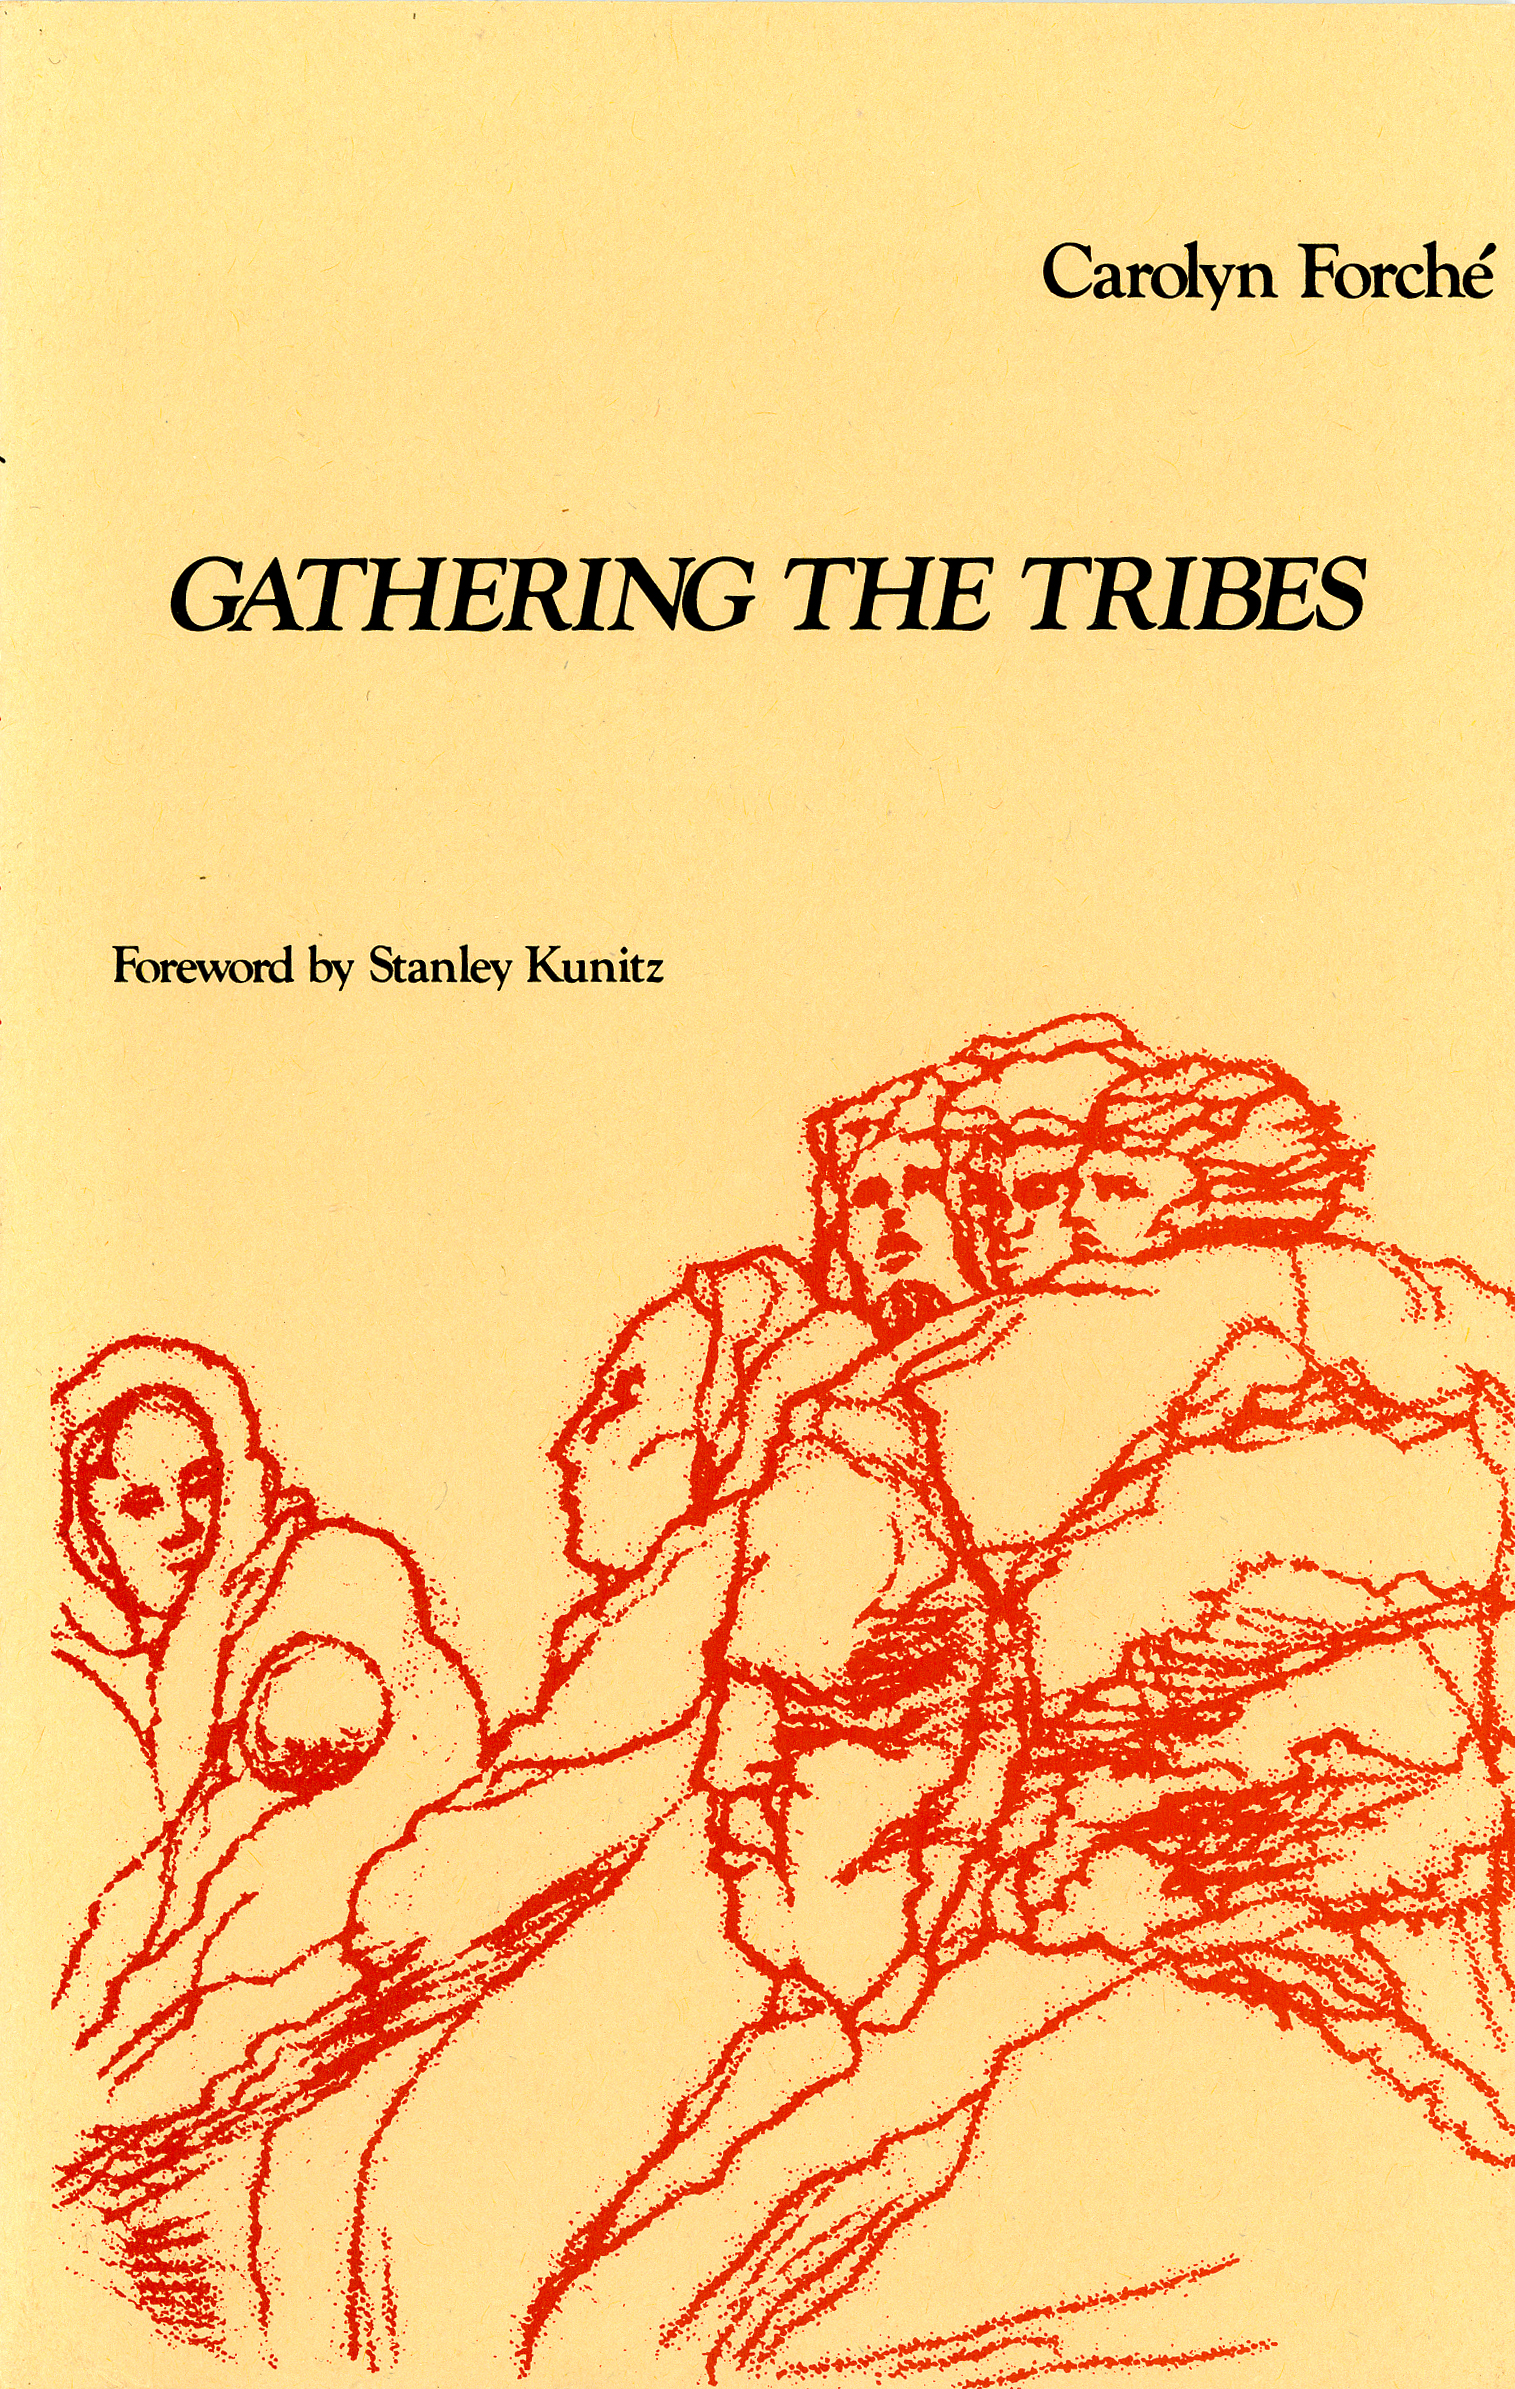 Gathering the Tribes by